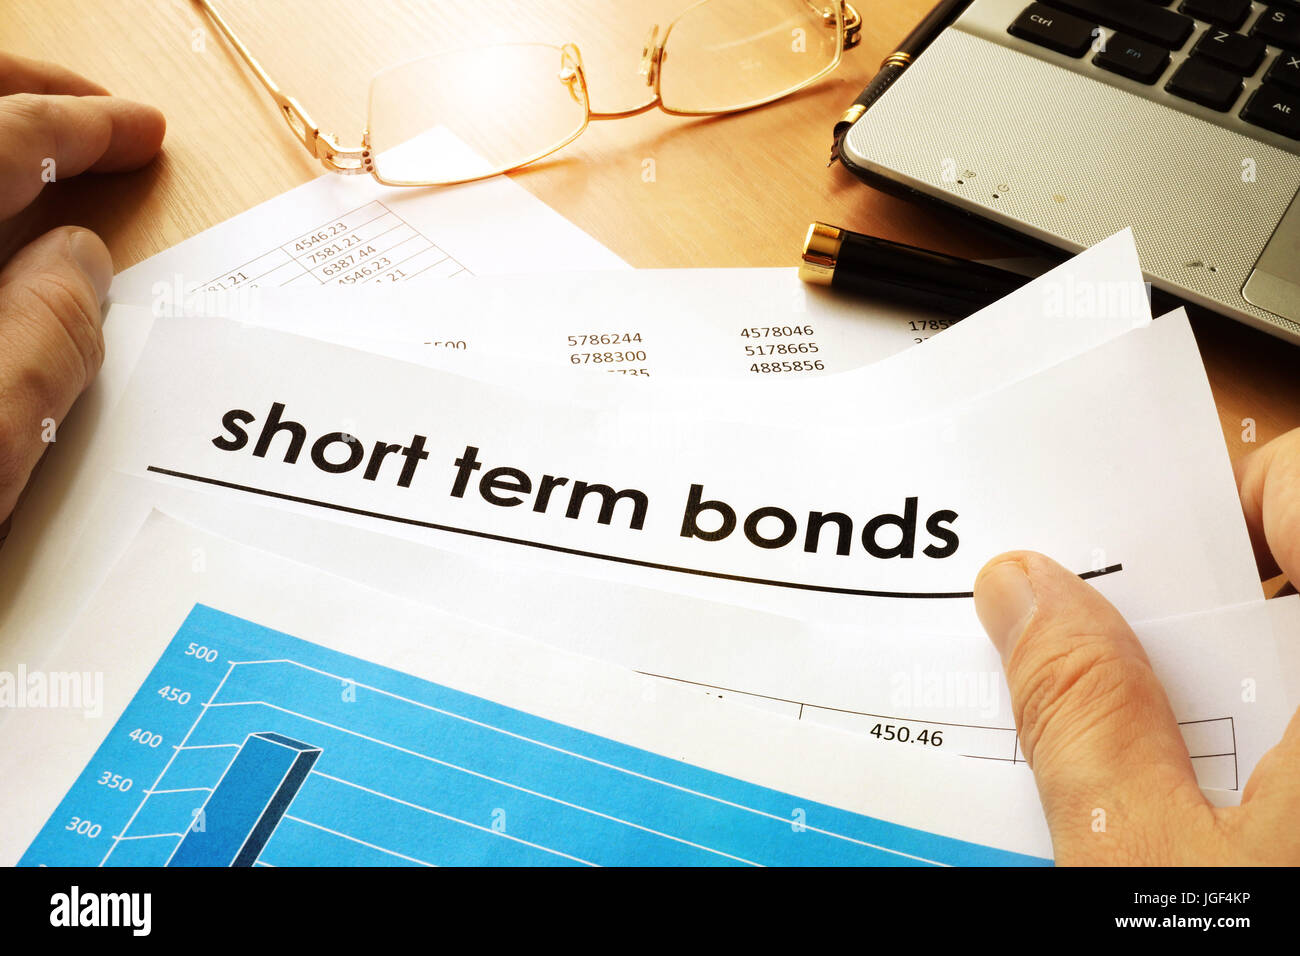 Papers with title short term bonds. Stock Photo